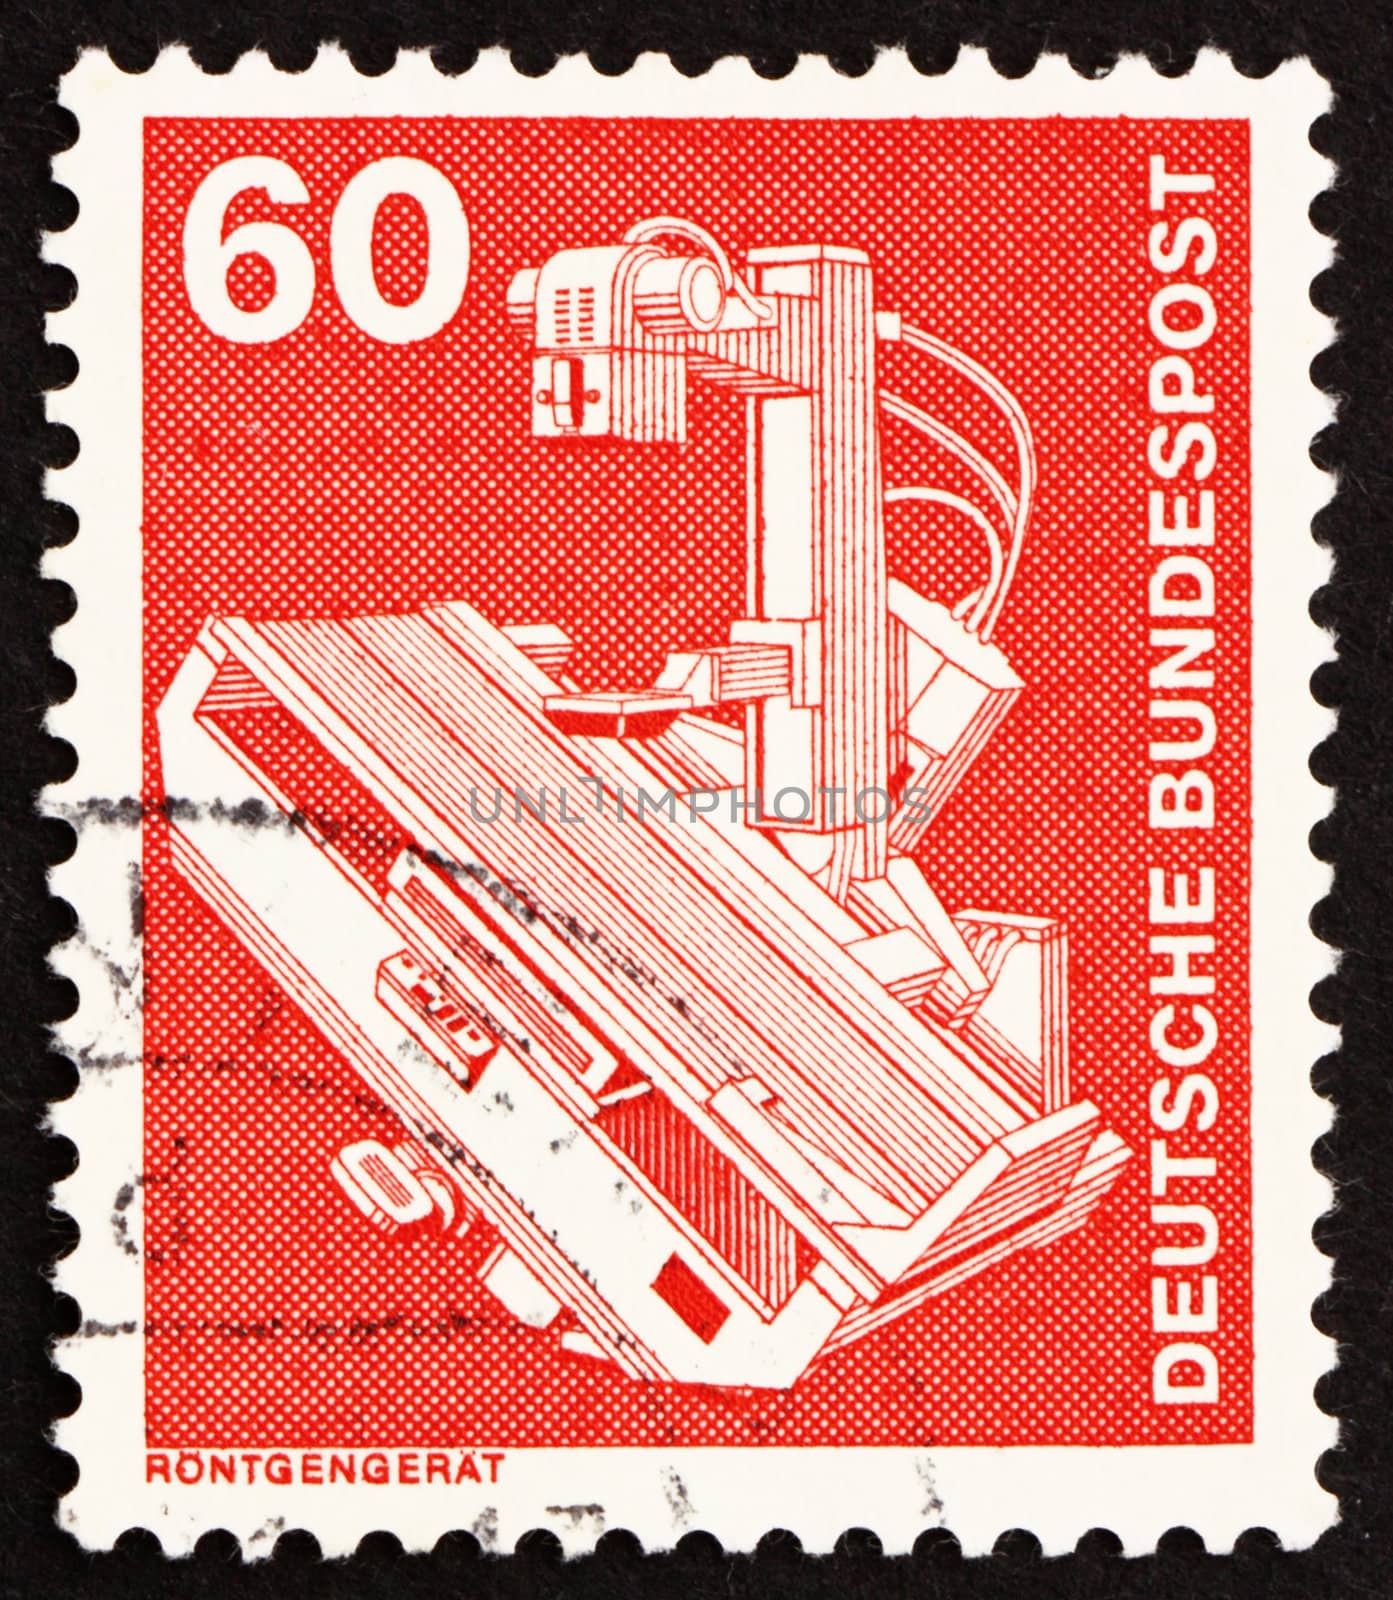 GERMANY - CIRCA 1978: a stamp printed in the Germany shows X-Ray Machine, circa 1978